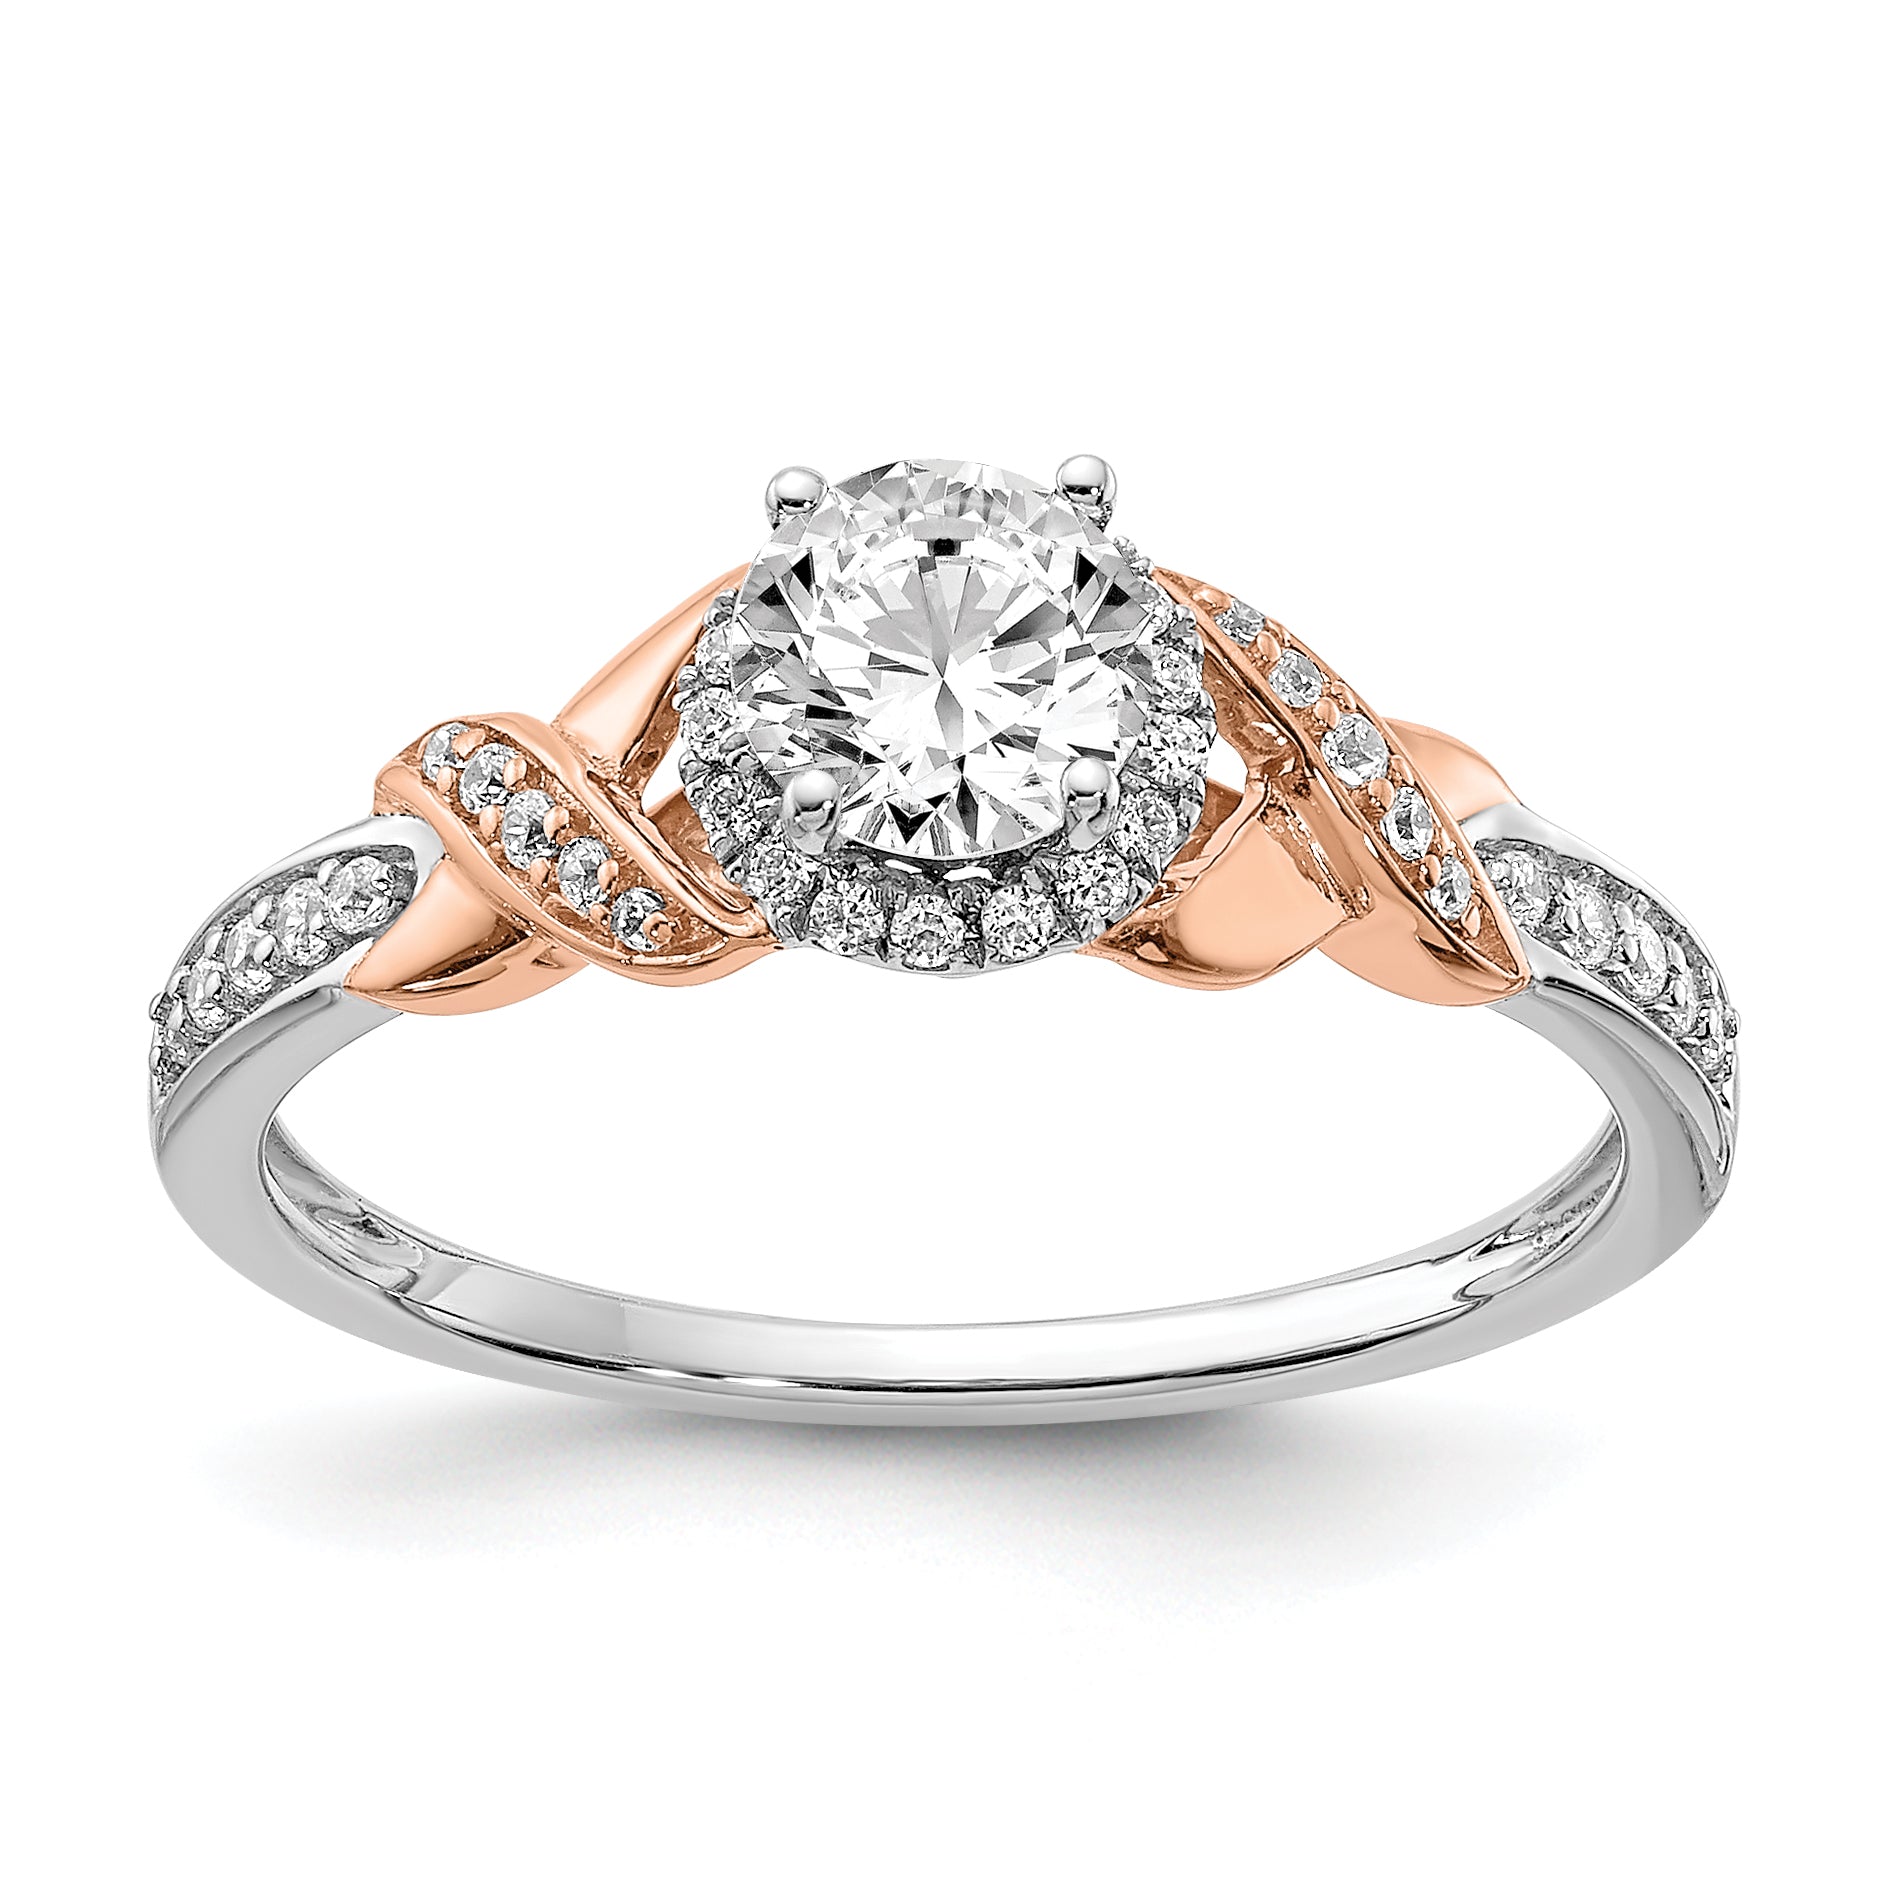 Image of ID 1 045ct CZ Solid Real 14k White & Rose Gold Engagement Ring